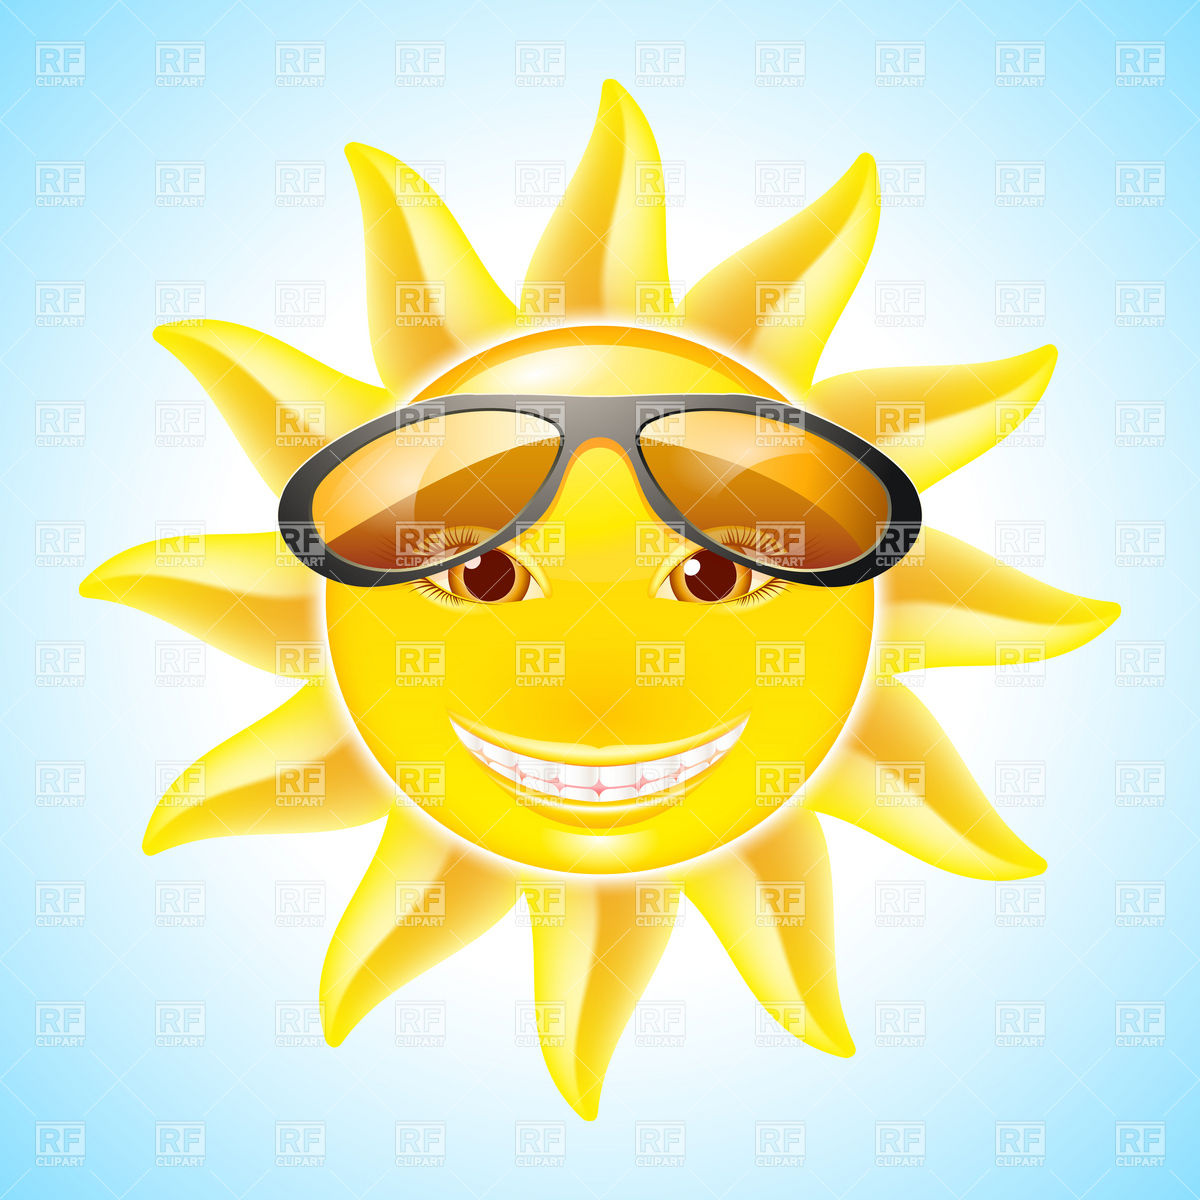 Cartoon Smiling Sun With Face And Sunglasses 8427 Download Royalty